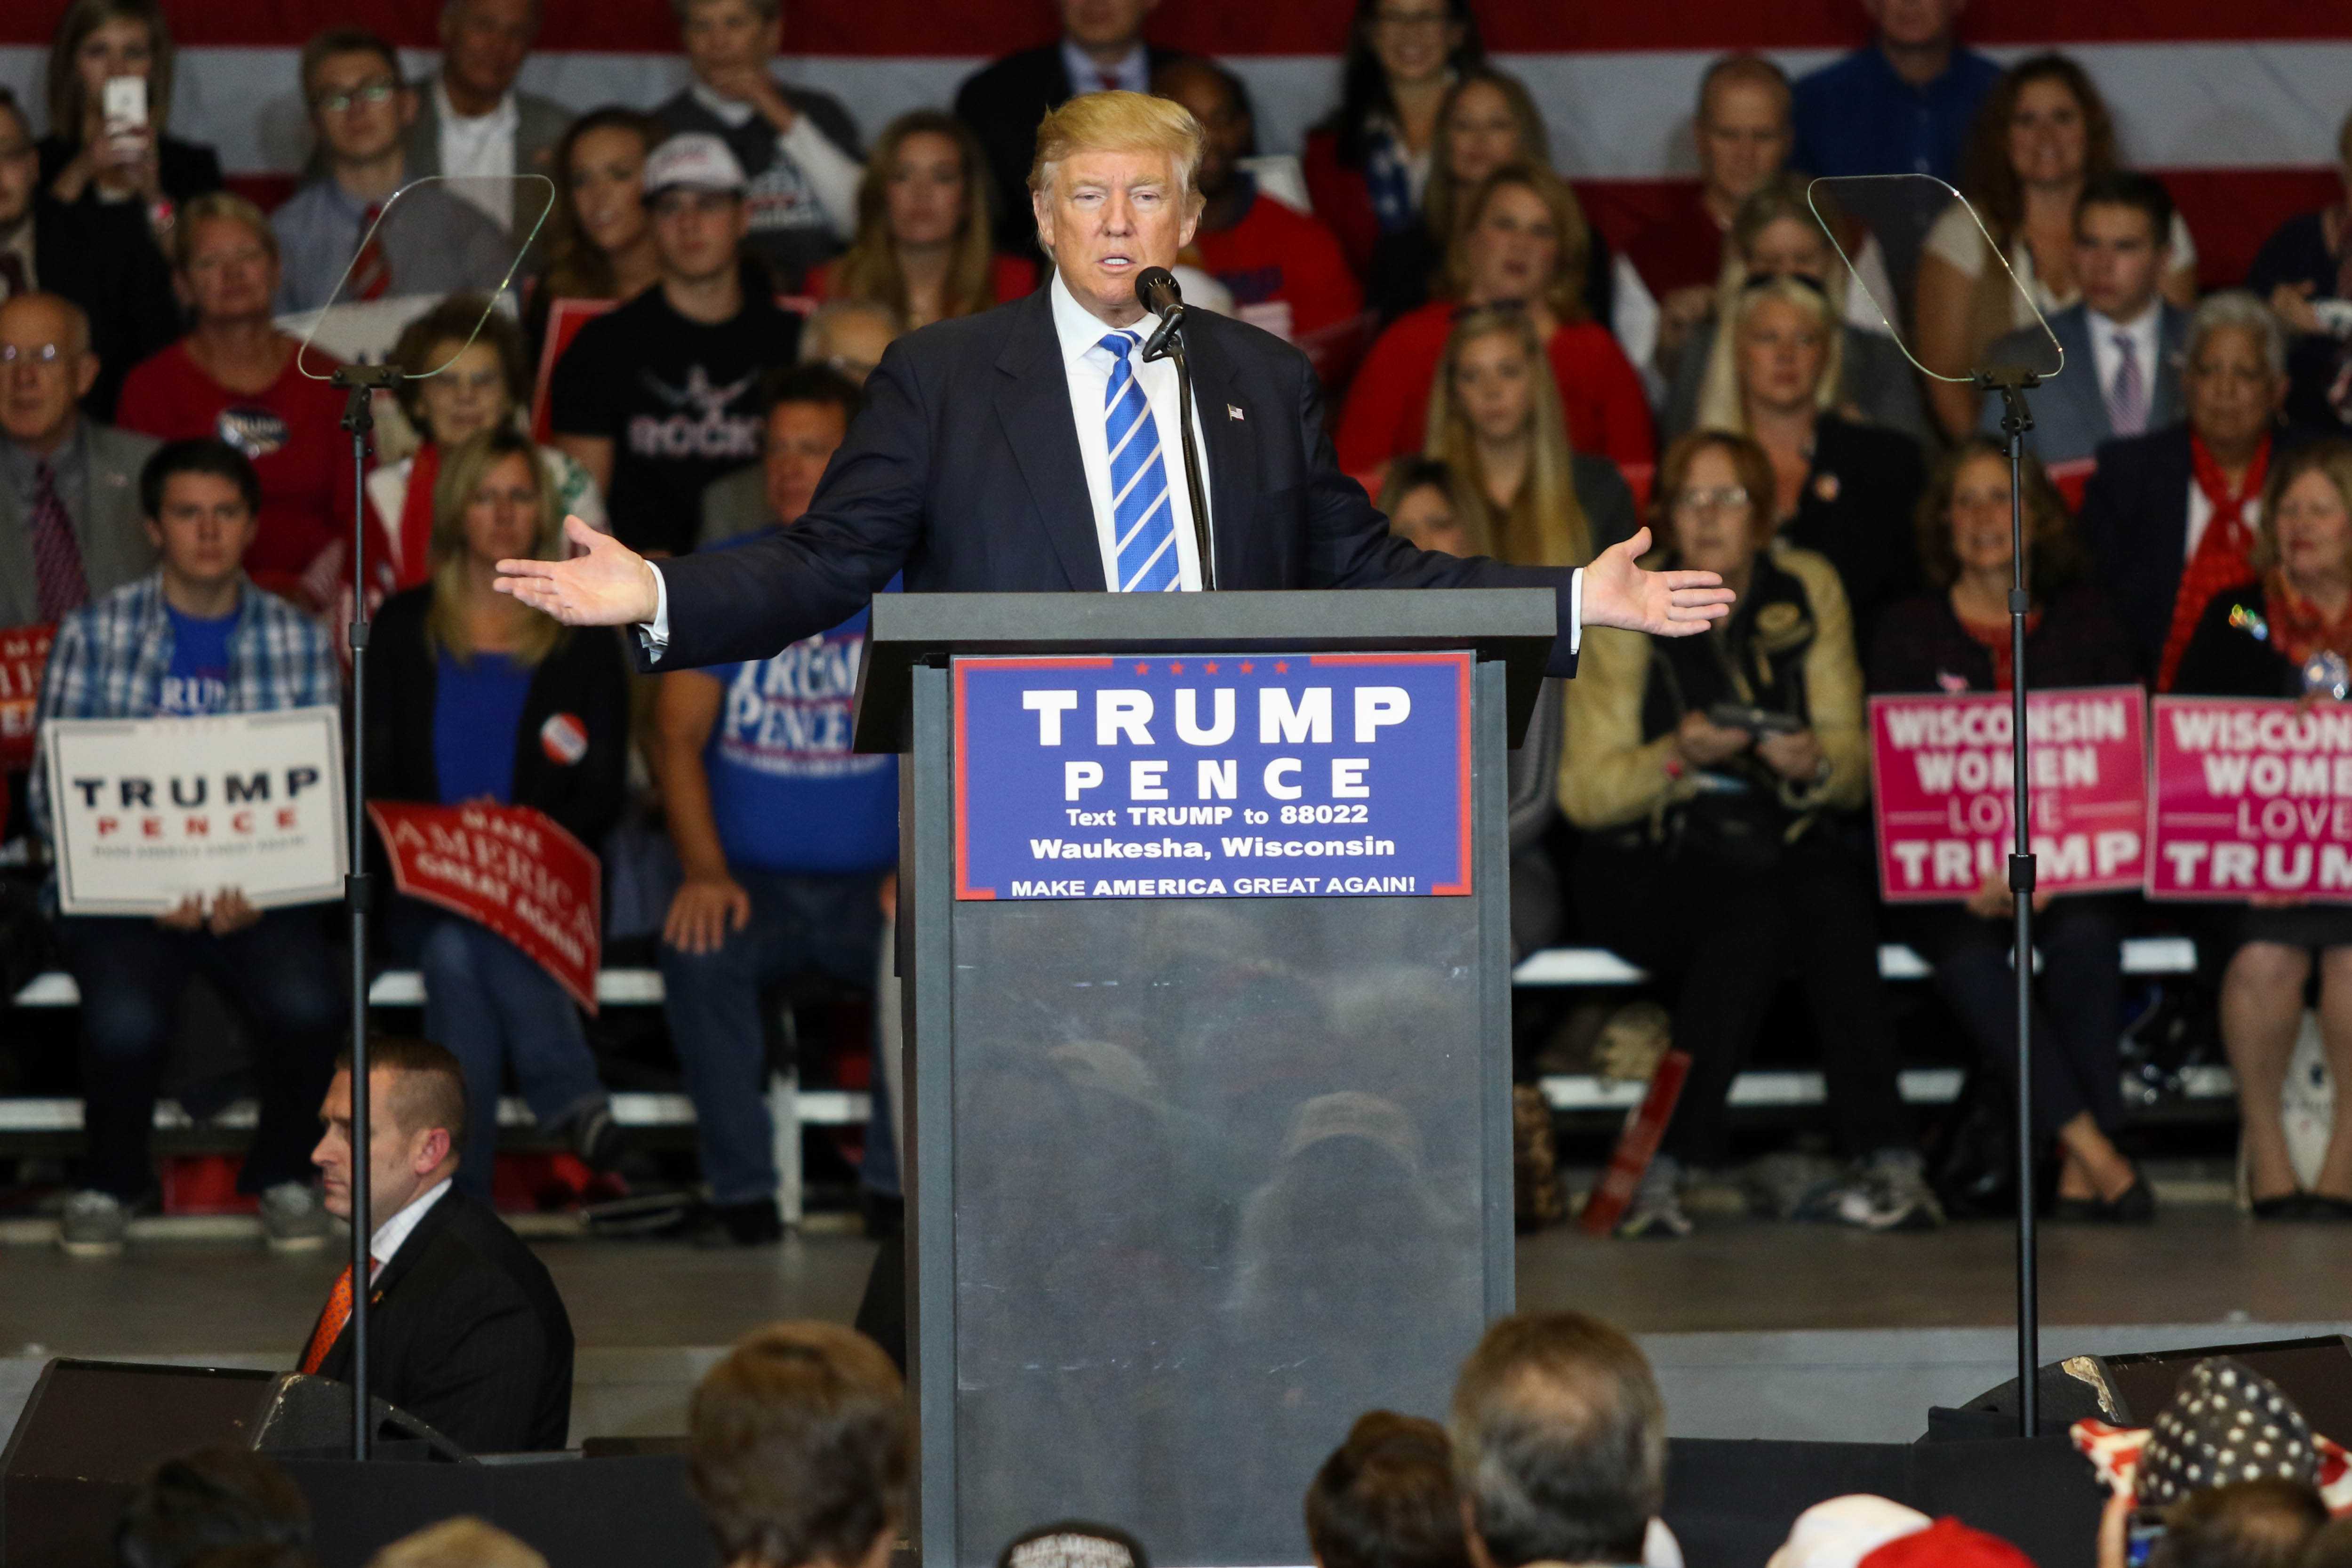 Trump campaigns in Waukesha for Wisconsin vote